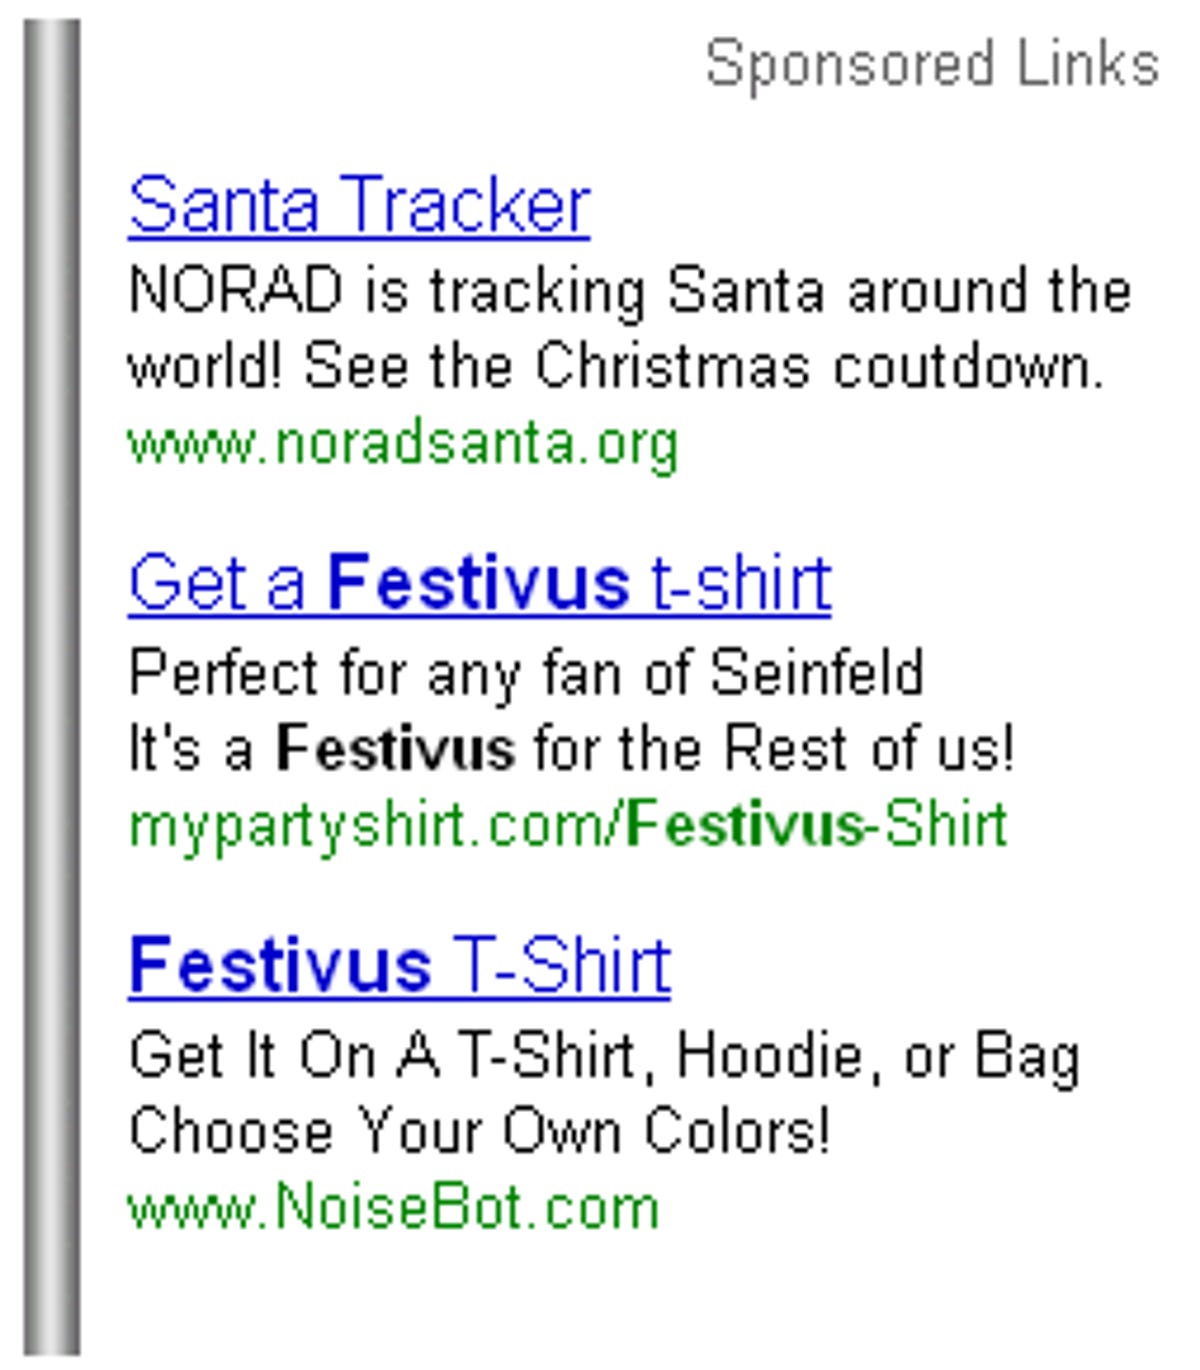 George Costanza would be proud of the Festivus pole that shows on a Google search for 'Festivus.'